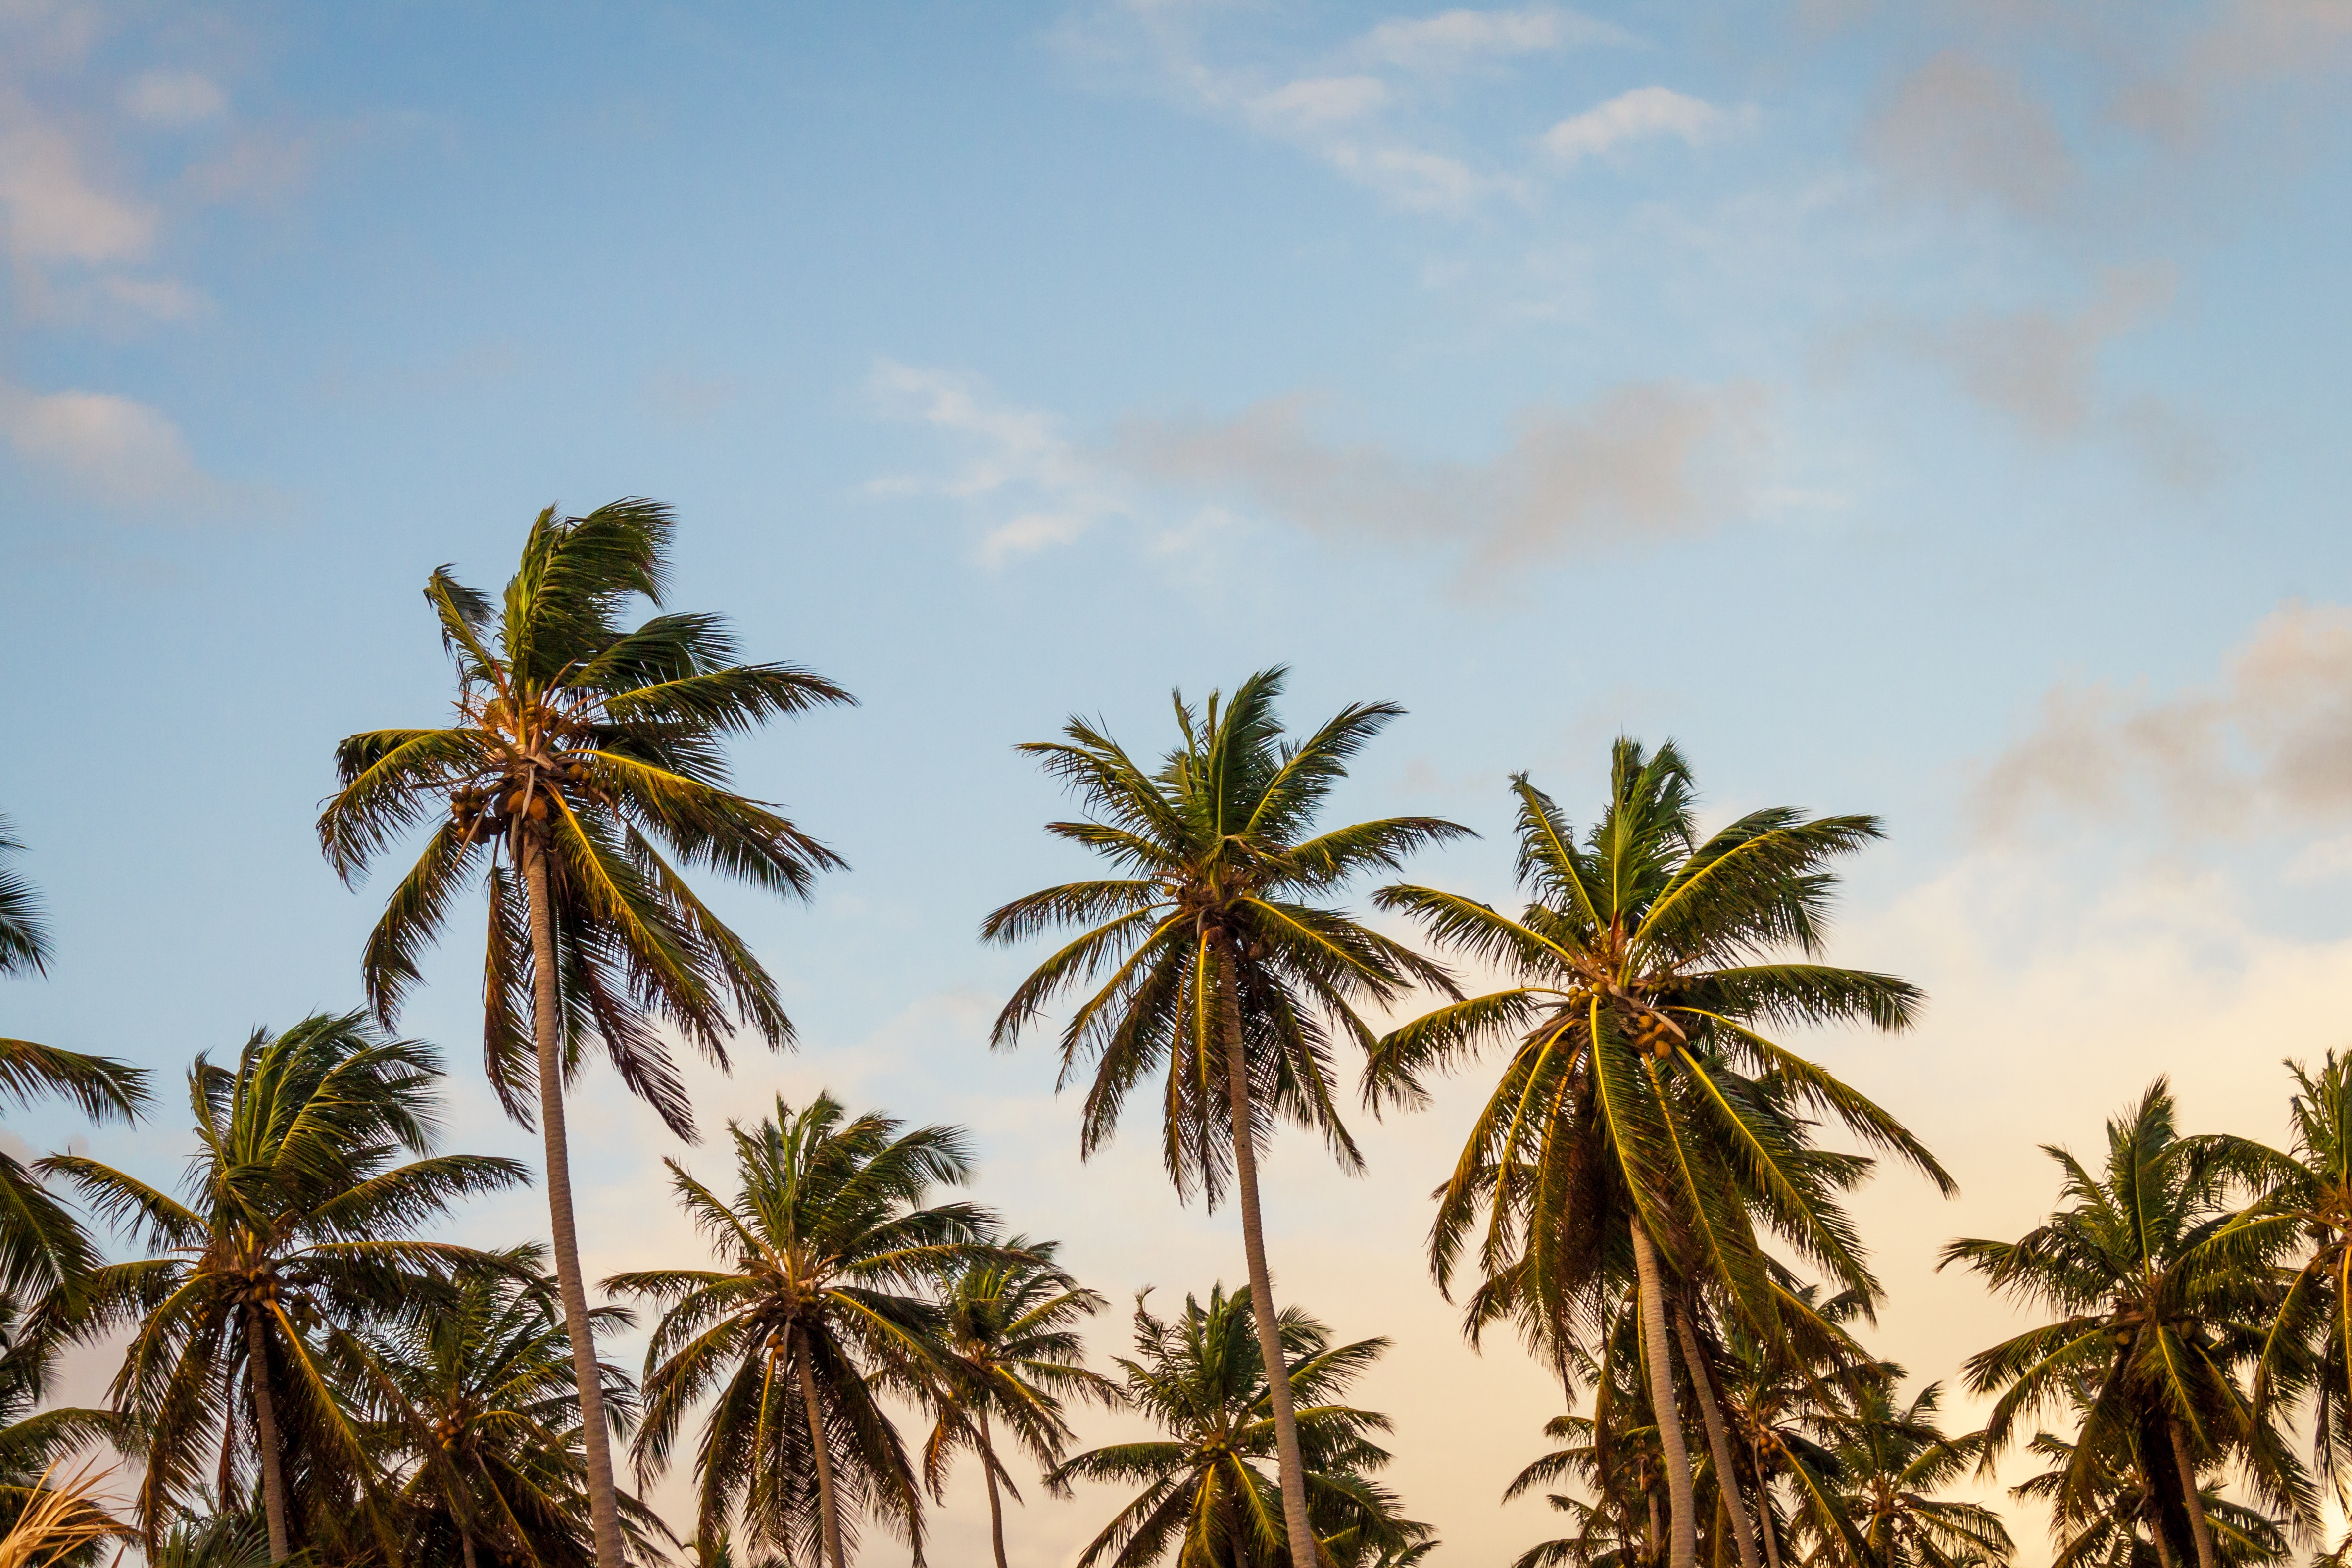 palm trees framed in front of a blue sky with light fluffy clouds